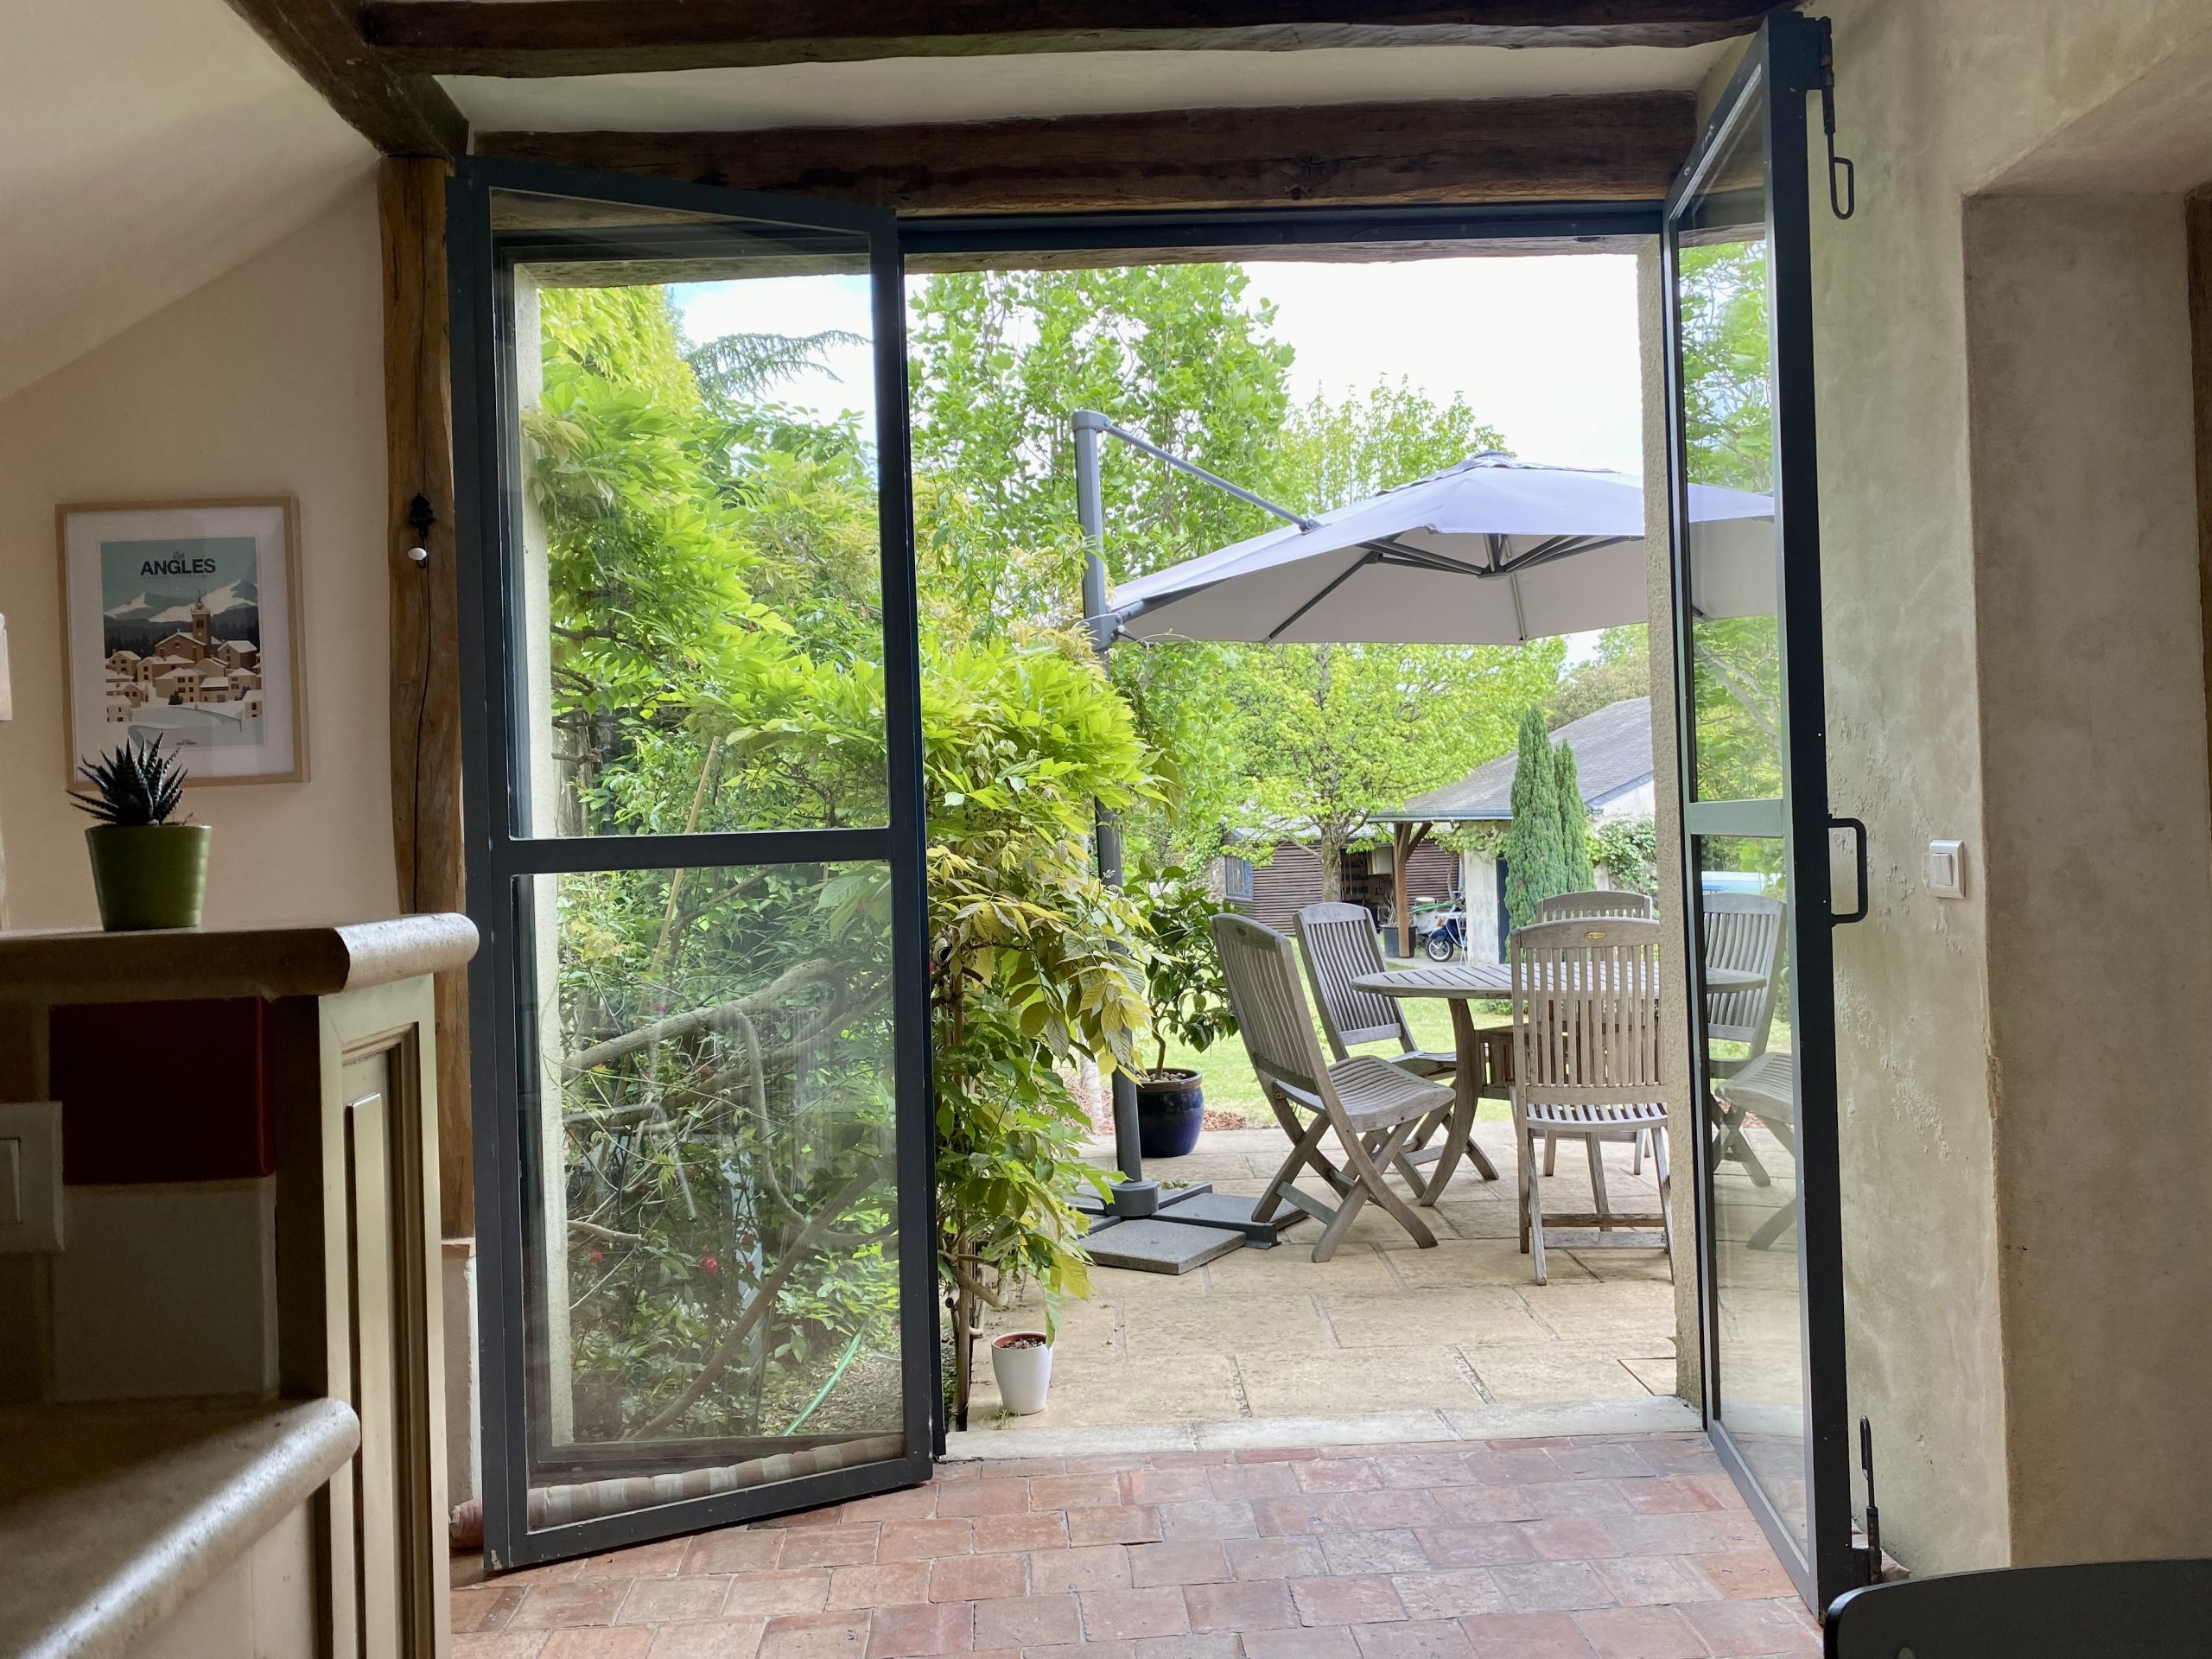 WEST of TOURS CHARMING RESIDENCE on 1.000m² GARDEN  OUTBUILDINGS SWIMMING POOL CELLARS GARAGES